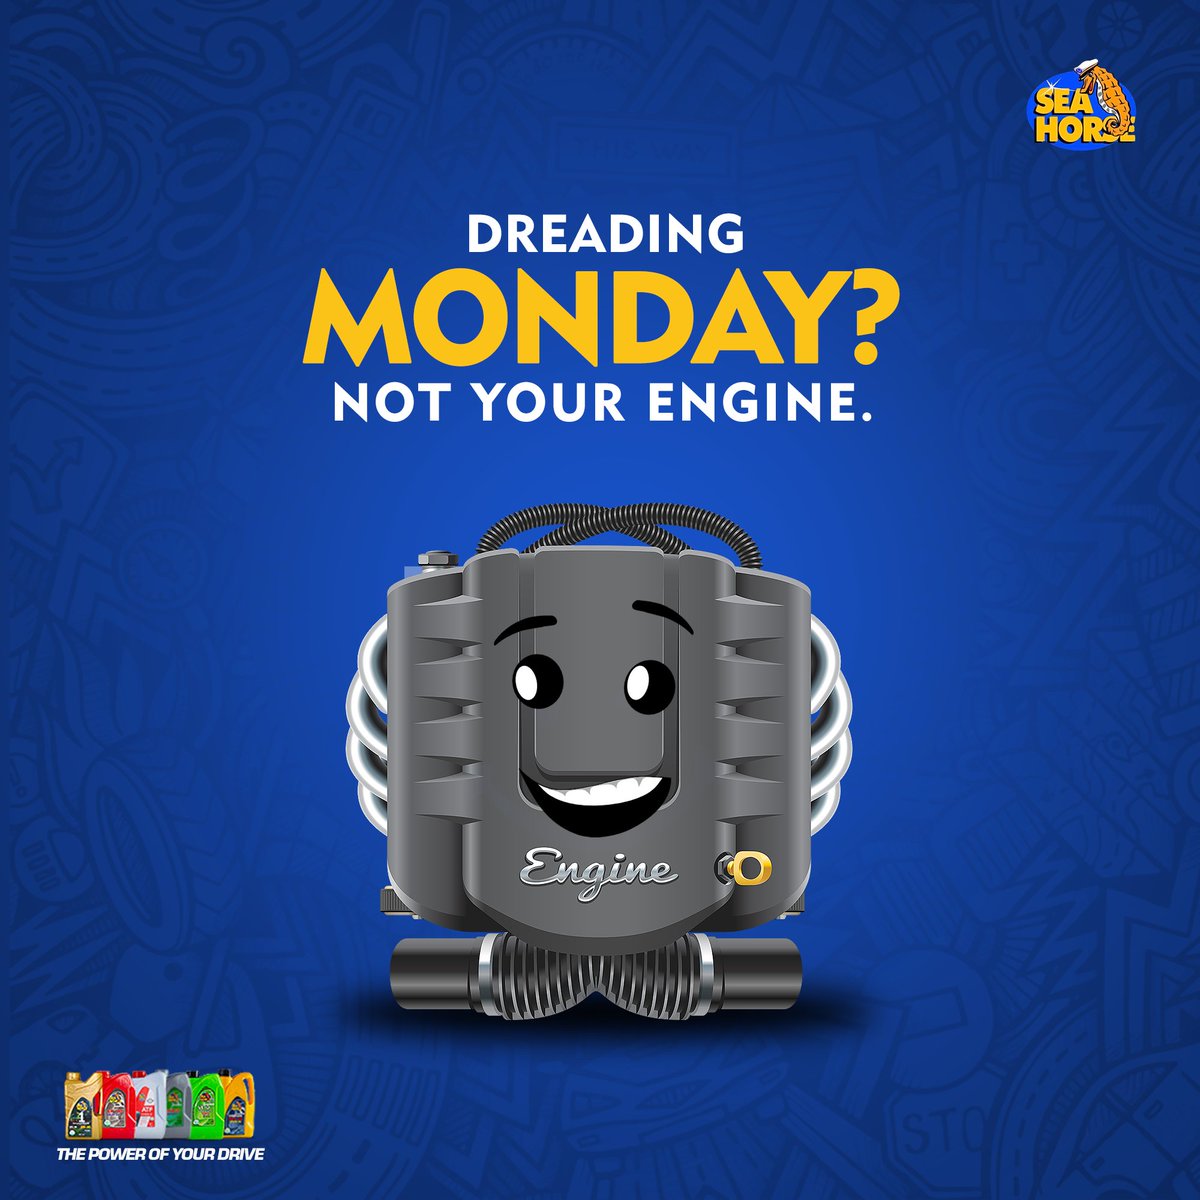 Don't let a grumpy engine ruin your bright Monday.

#MotorOil #CarCare #Maintenance #MotorLubricants #EngineOil #QualityOil #SeaHorseLubricants #ThePowerOfYourDrive